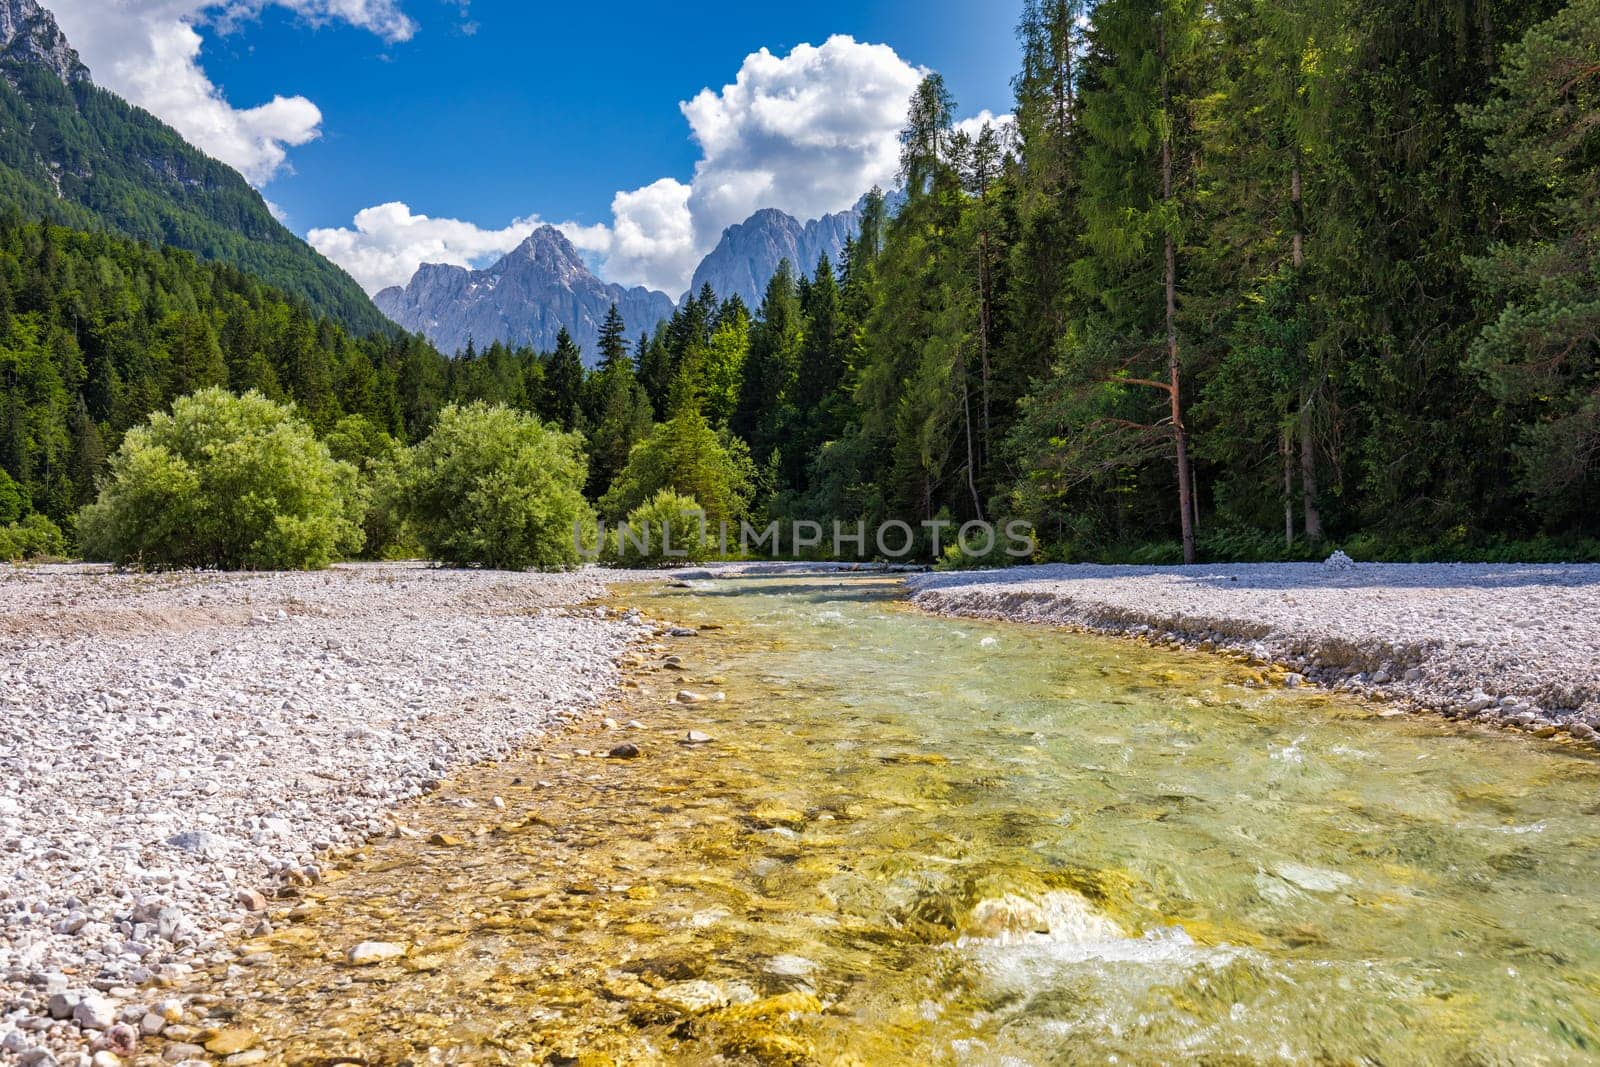 The Pisnica River in Kranjska Gora in the Upper Carniola region of north west Slovenia. It is a tributary of the Sava Dolinka River. Nature scenery in Triglav national park. Kranjska Gora, Slovenia